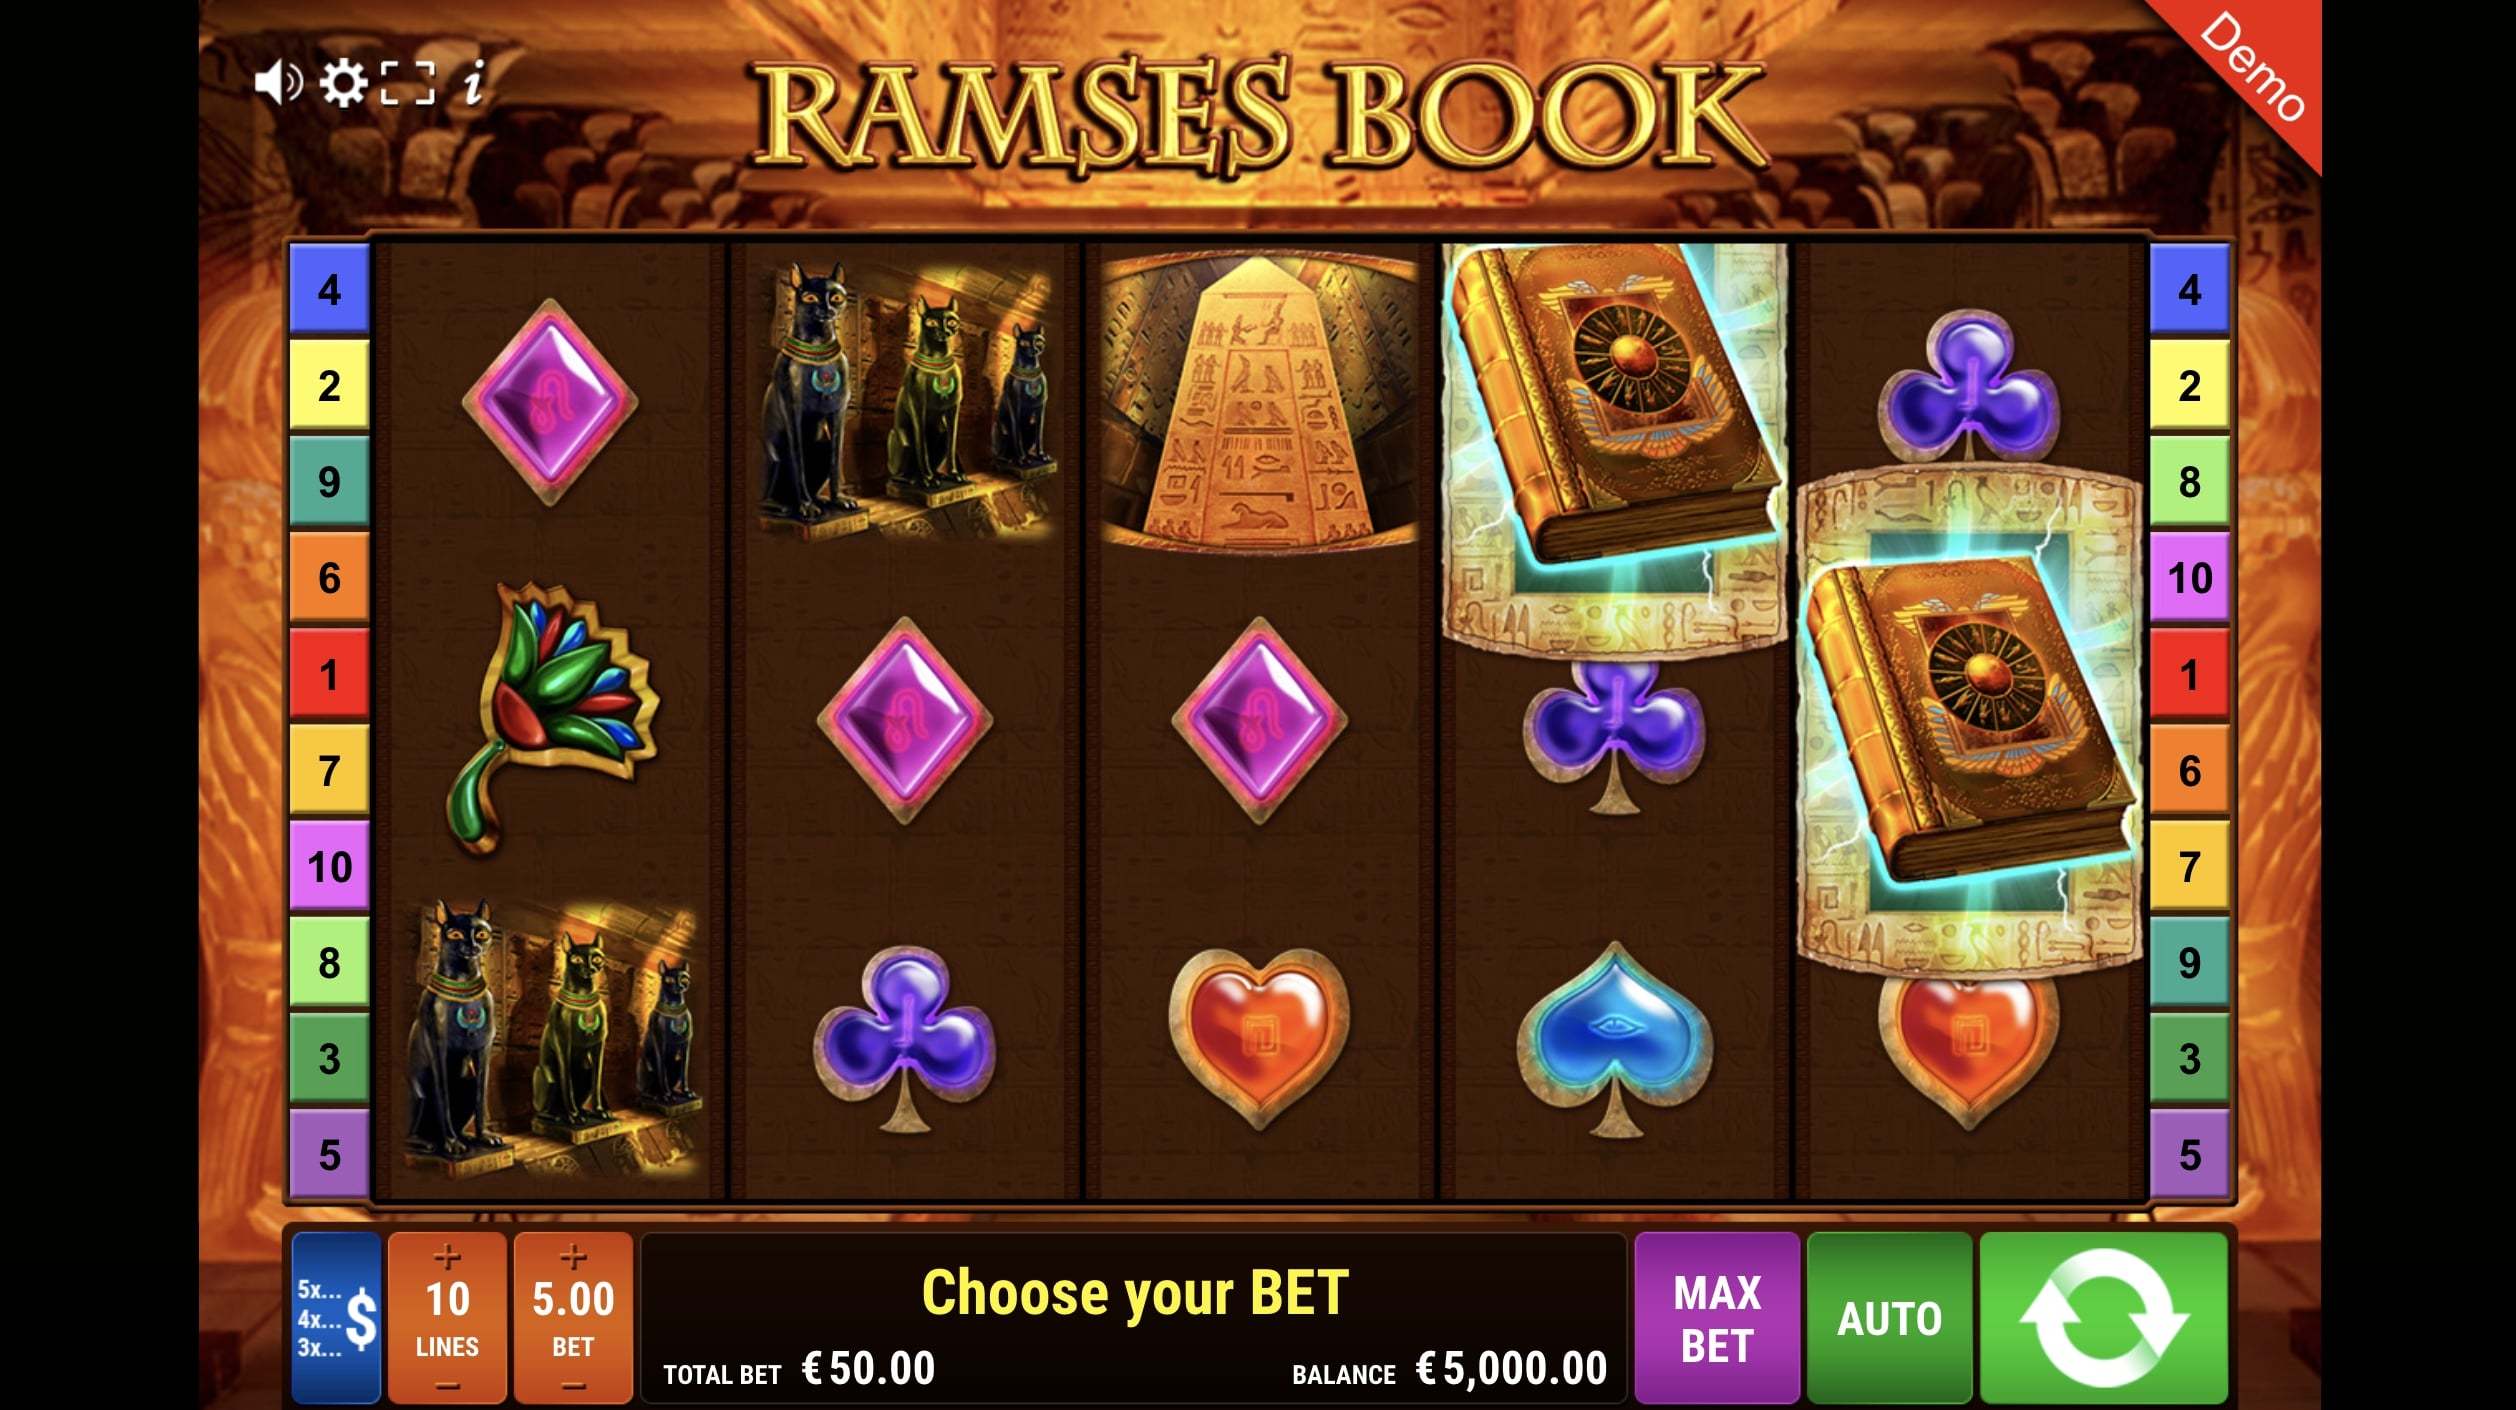 Ramses Book Slot Overview